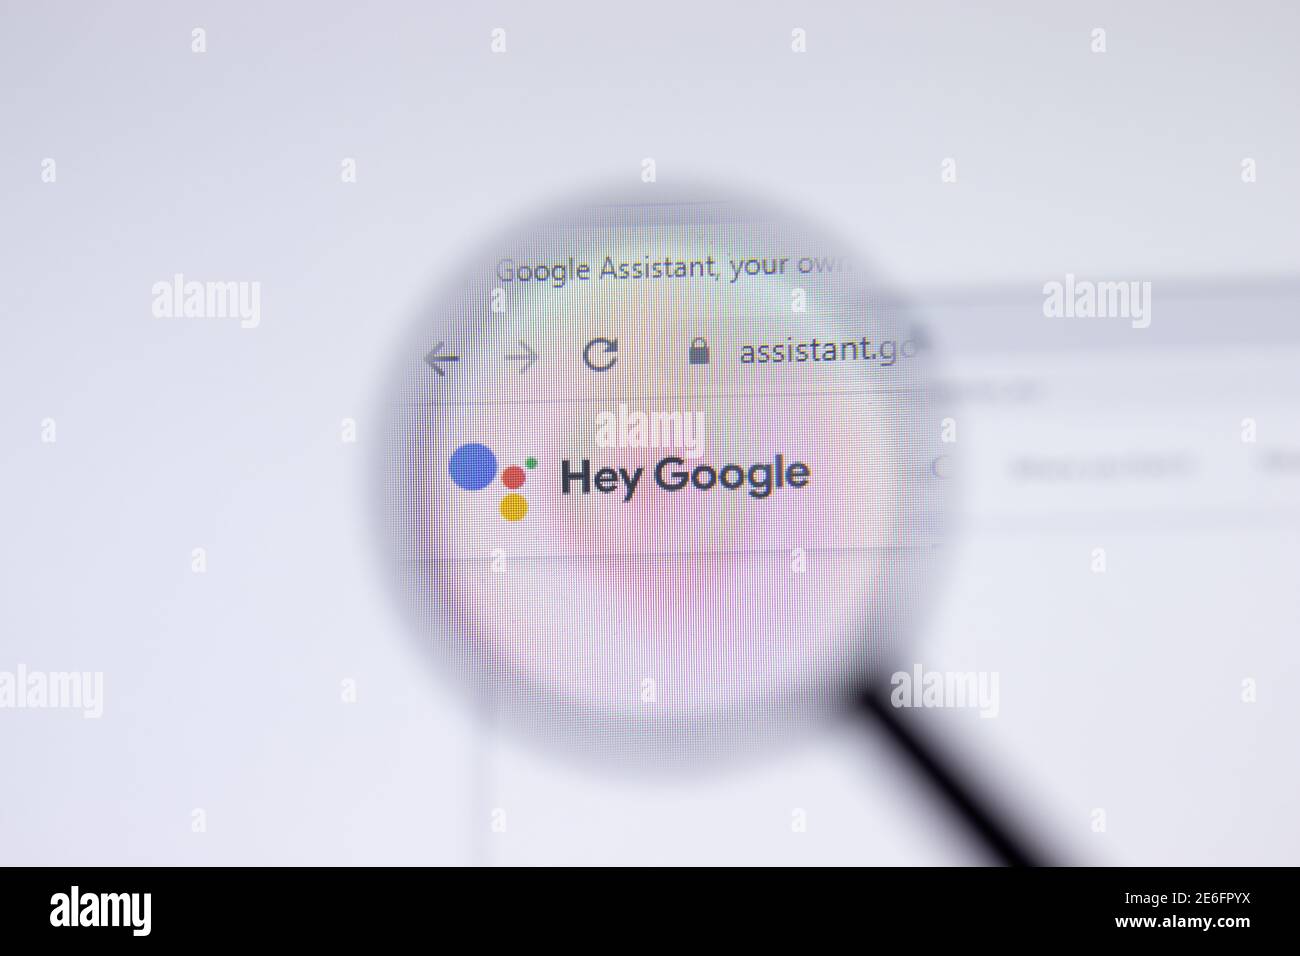 Saint Petersburg, Russia - 28 January 2021: Hey Google Assistant website page with logo close-up, Illustrative Editorial Stock Photo